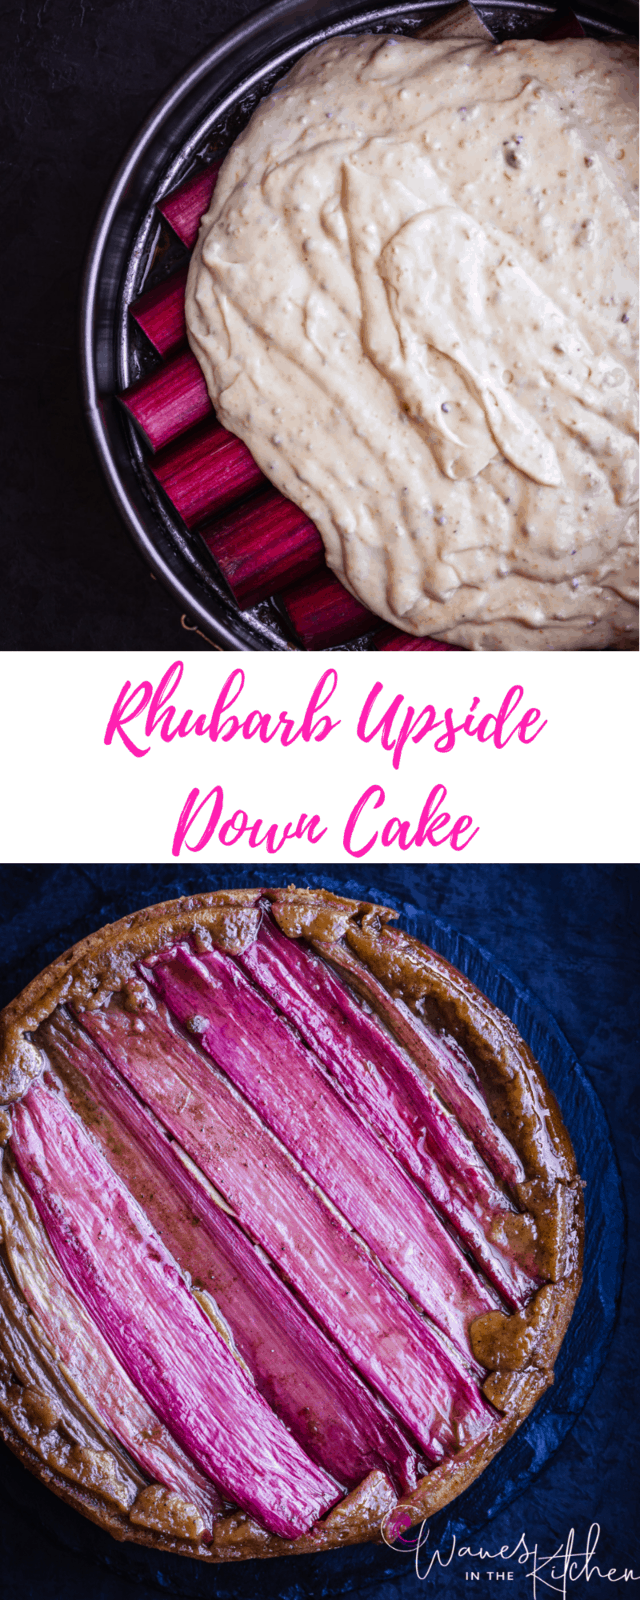 Cake batter being poured into the cake pan on top and the finished rhubarb upside-down cake on the bottom.